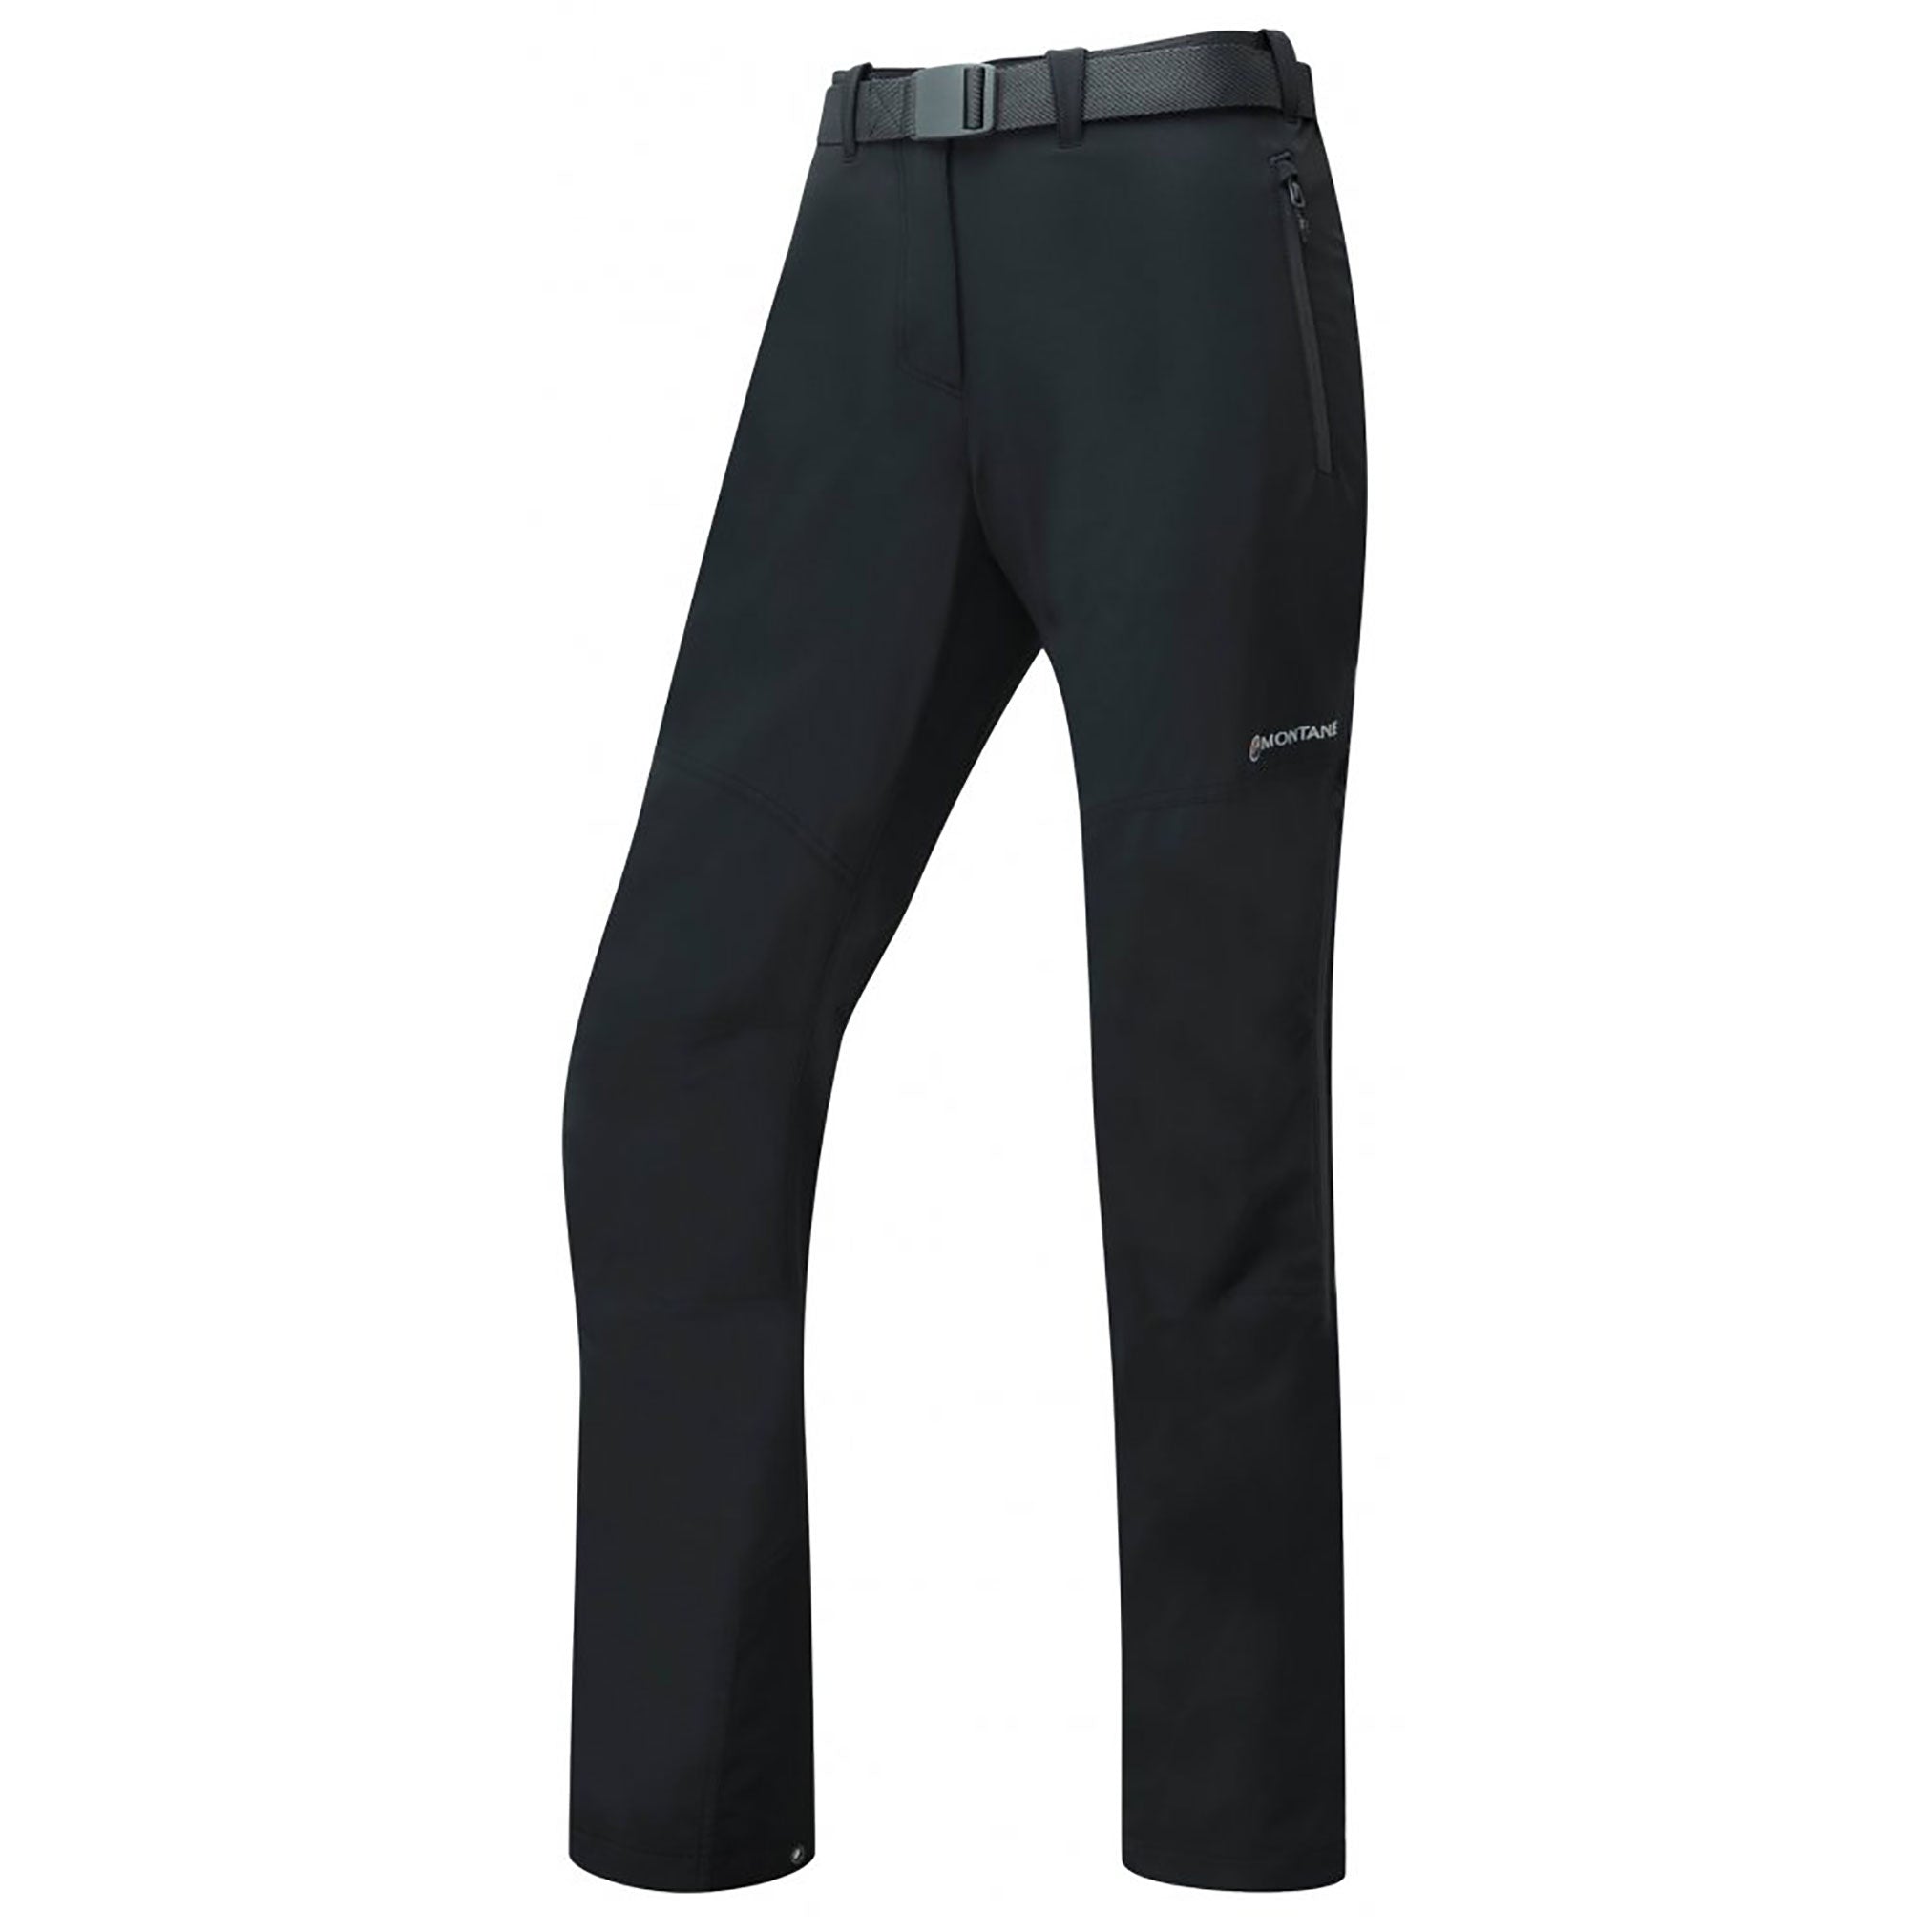 Montane Terra Pants Review - Wired For Adventure